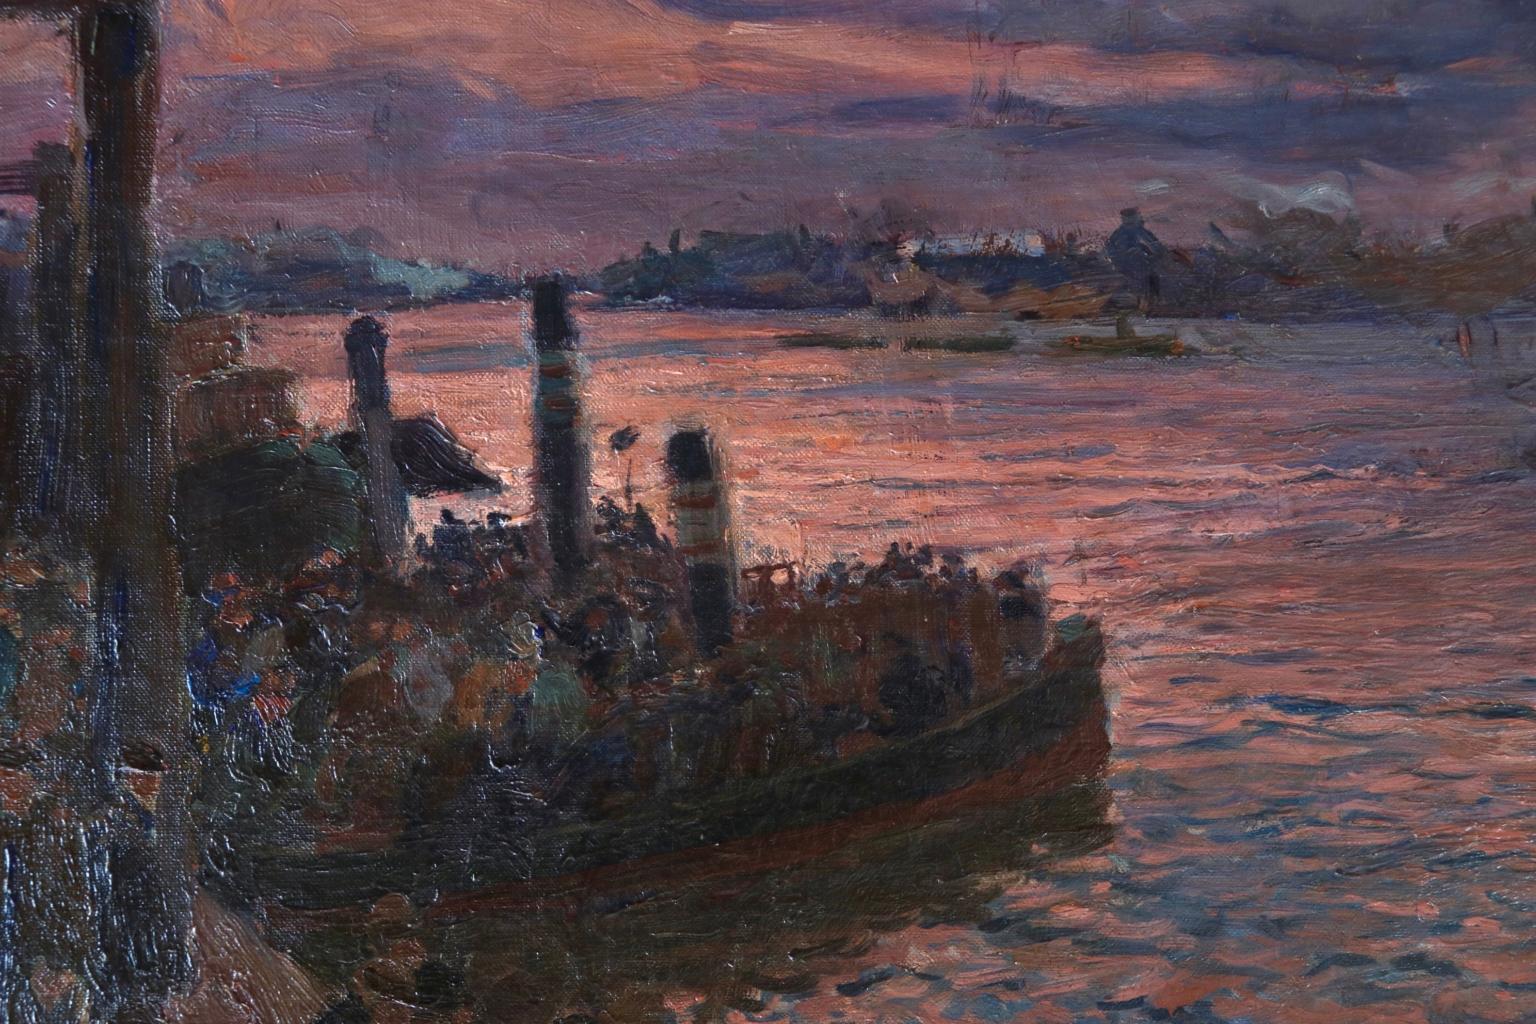 Waiting for the Ferry - Hamburg - Impressionist Oil, River at Night - Kallmorgen 1